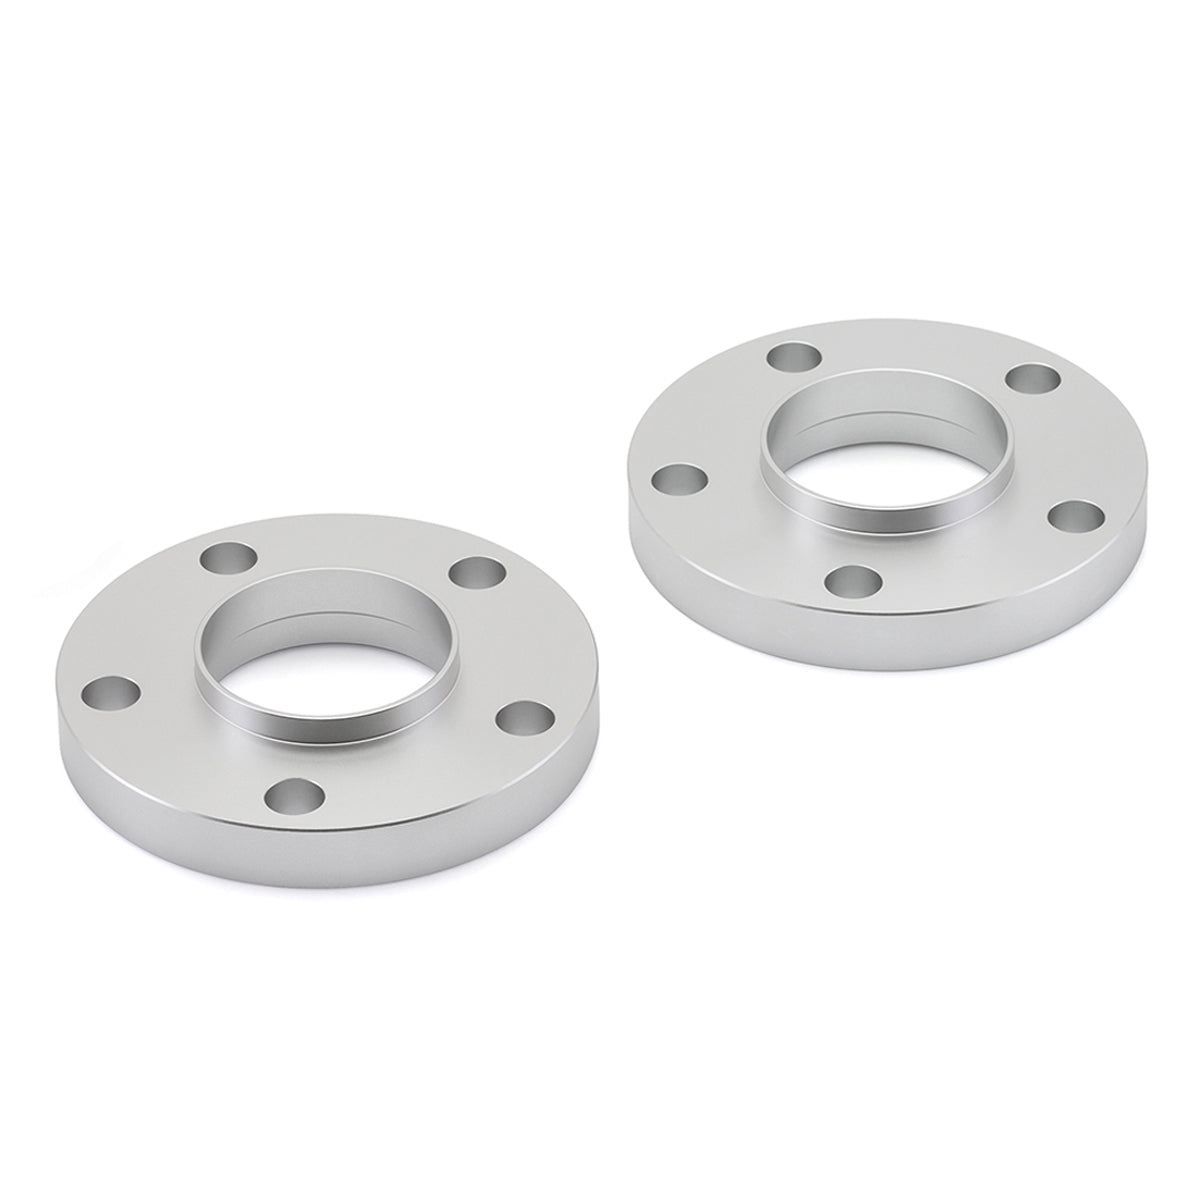 2008-2015 BMW 7 Series 5x120 Hubcentric Wheelcentric Wheel Spacers set of 2